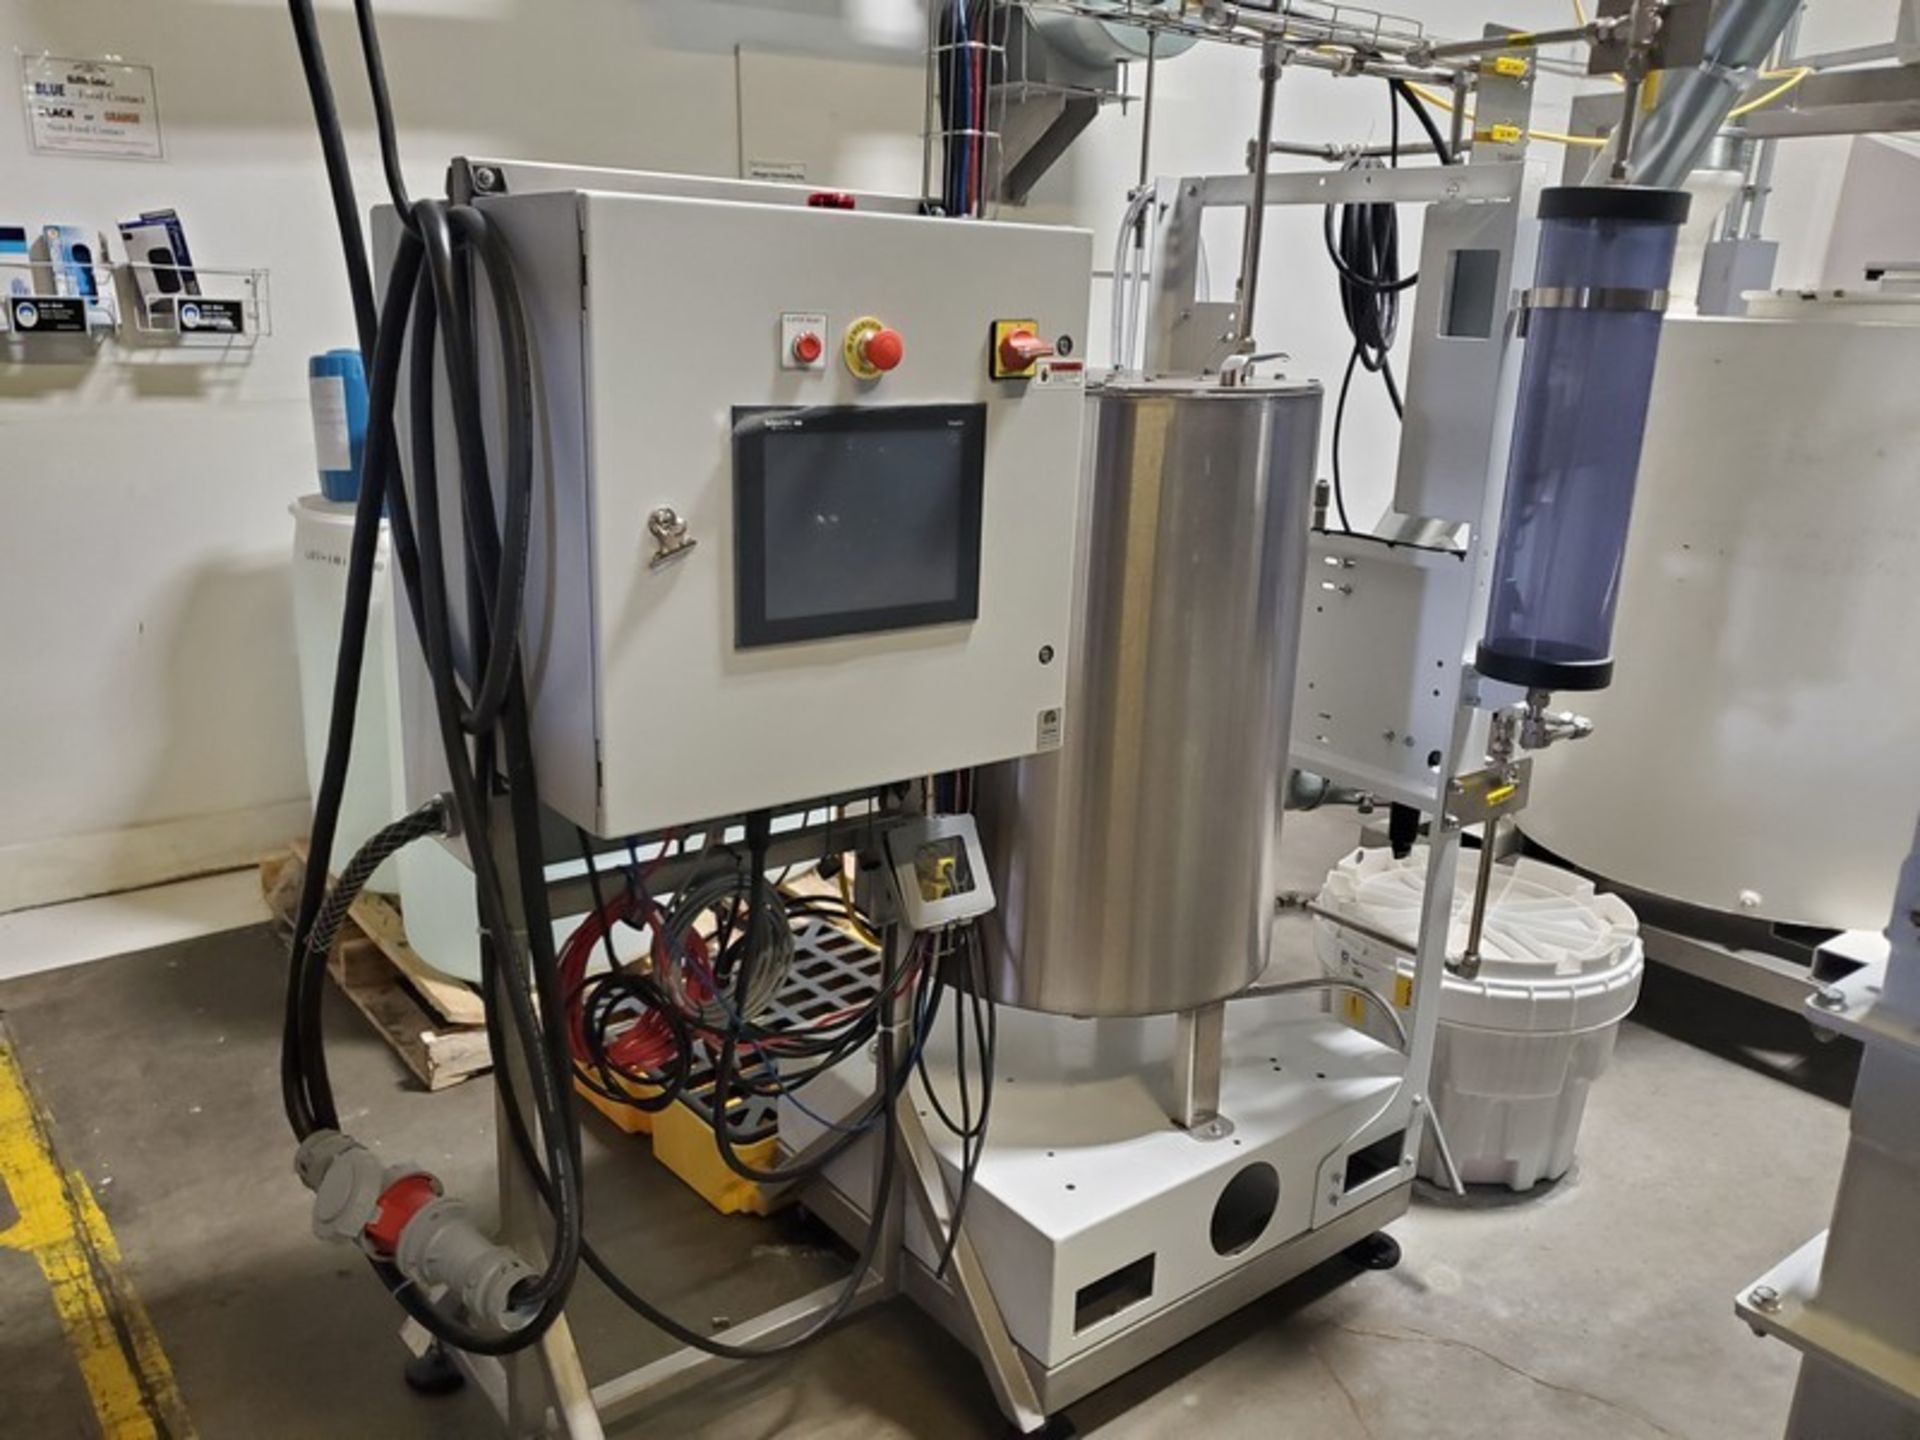 2018 Neo-Pure Seed, Nut, Grain & Hemp Pasteurizing and Drying System, - Image 14 of 108